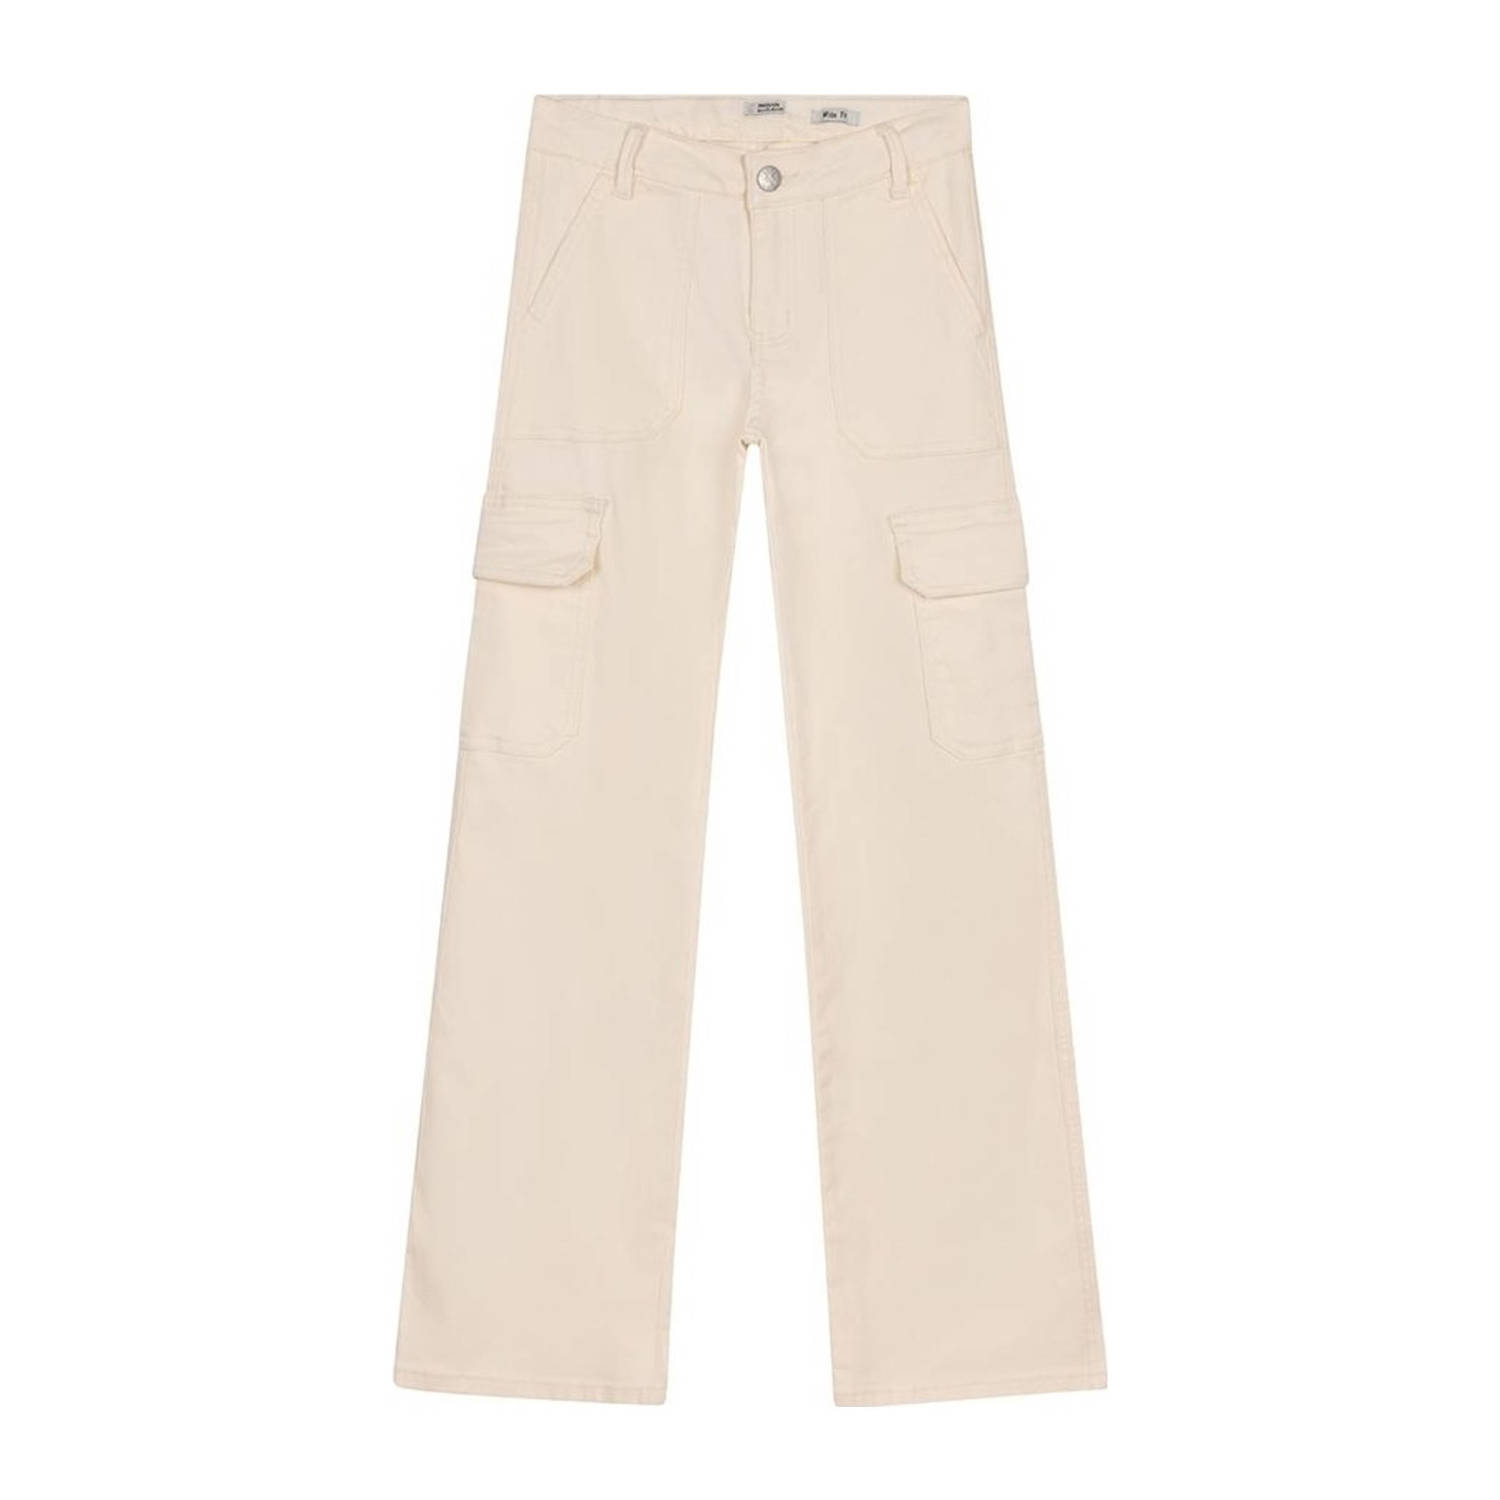 Indian Blue Jeans wide leg jeans offwhite